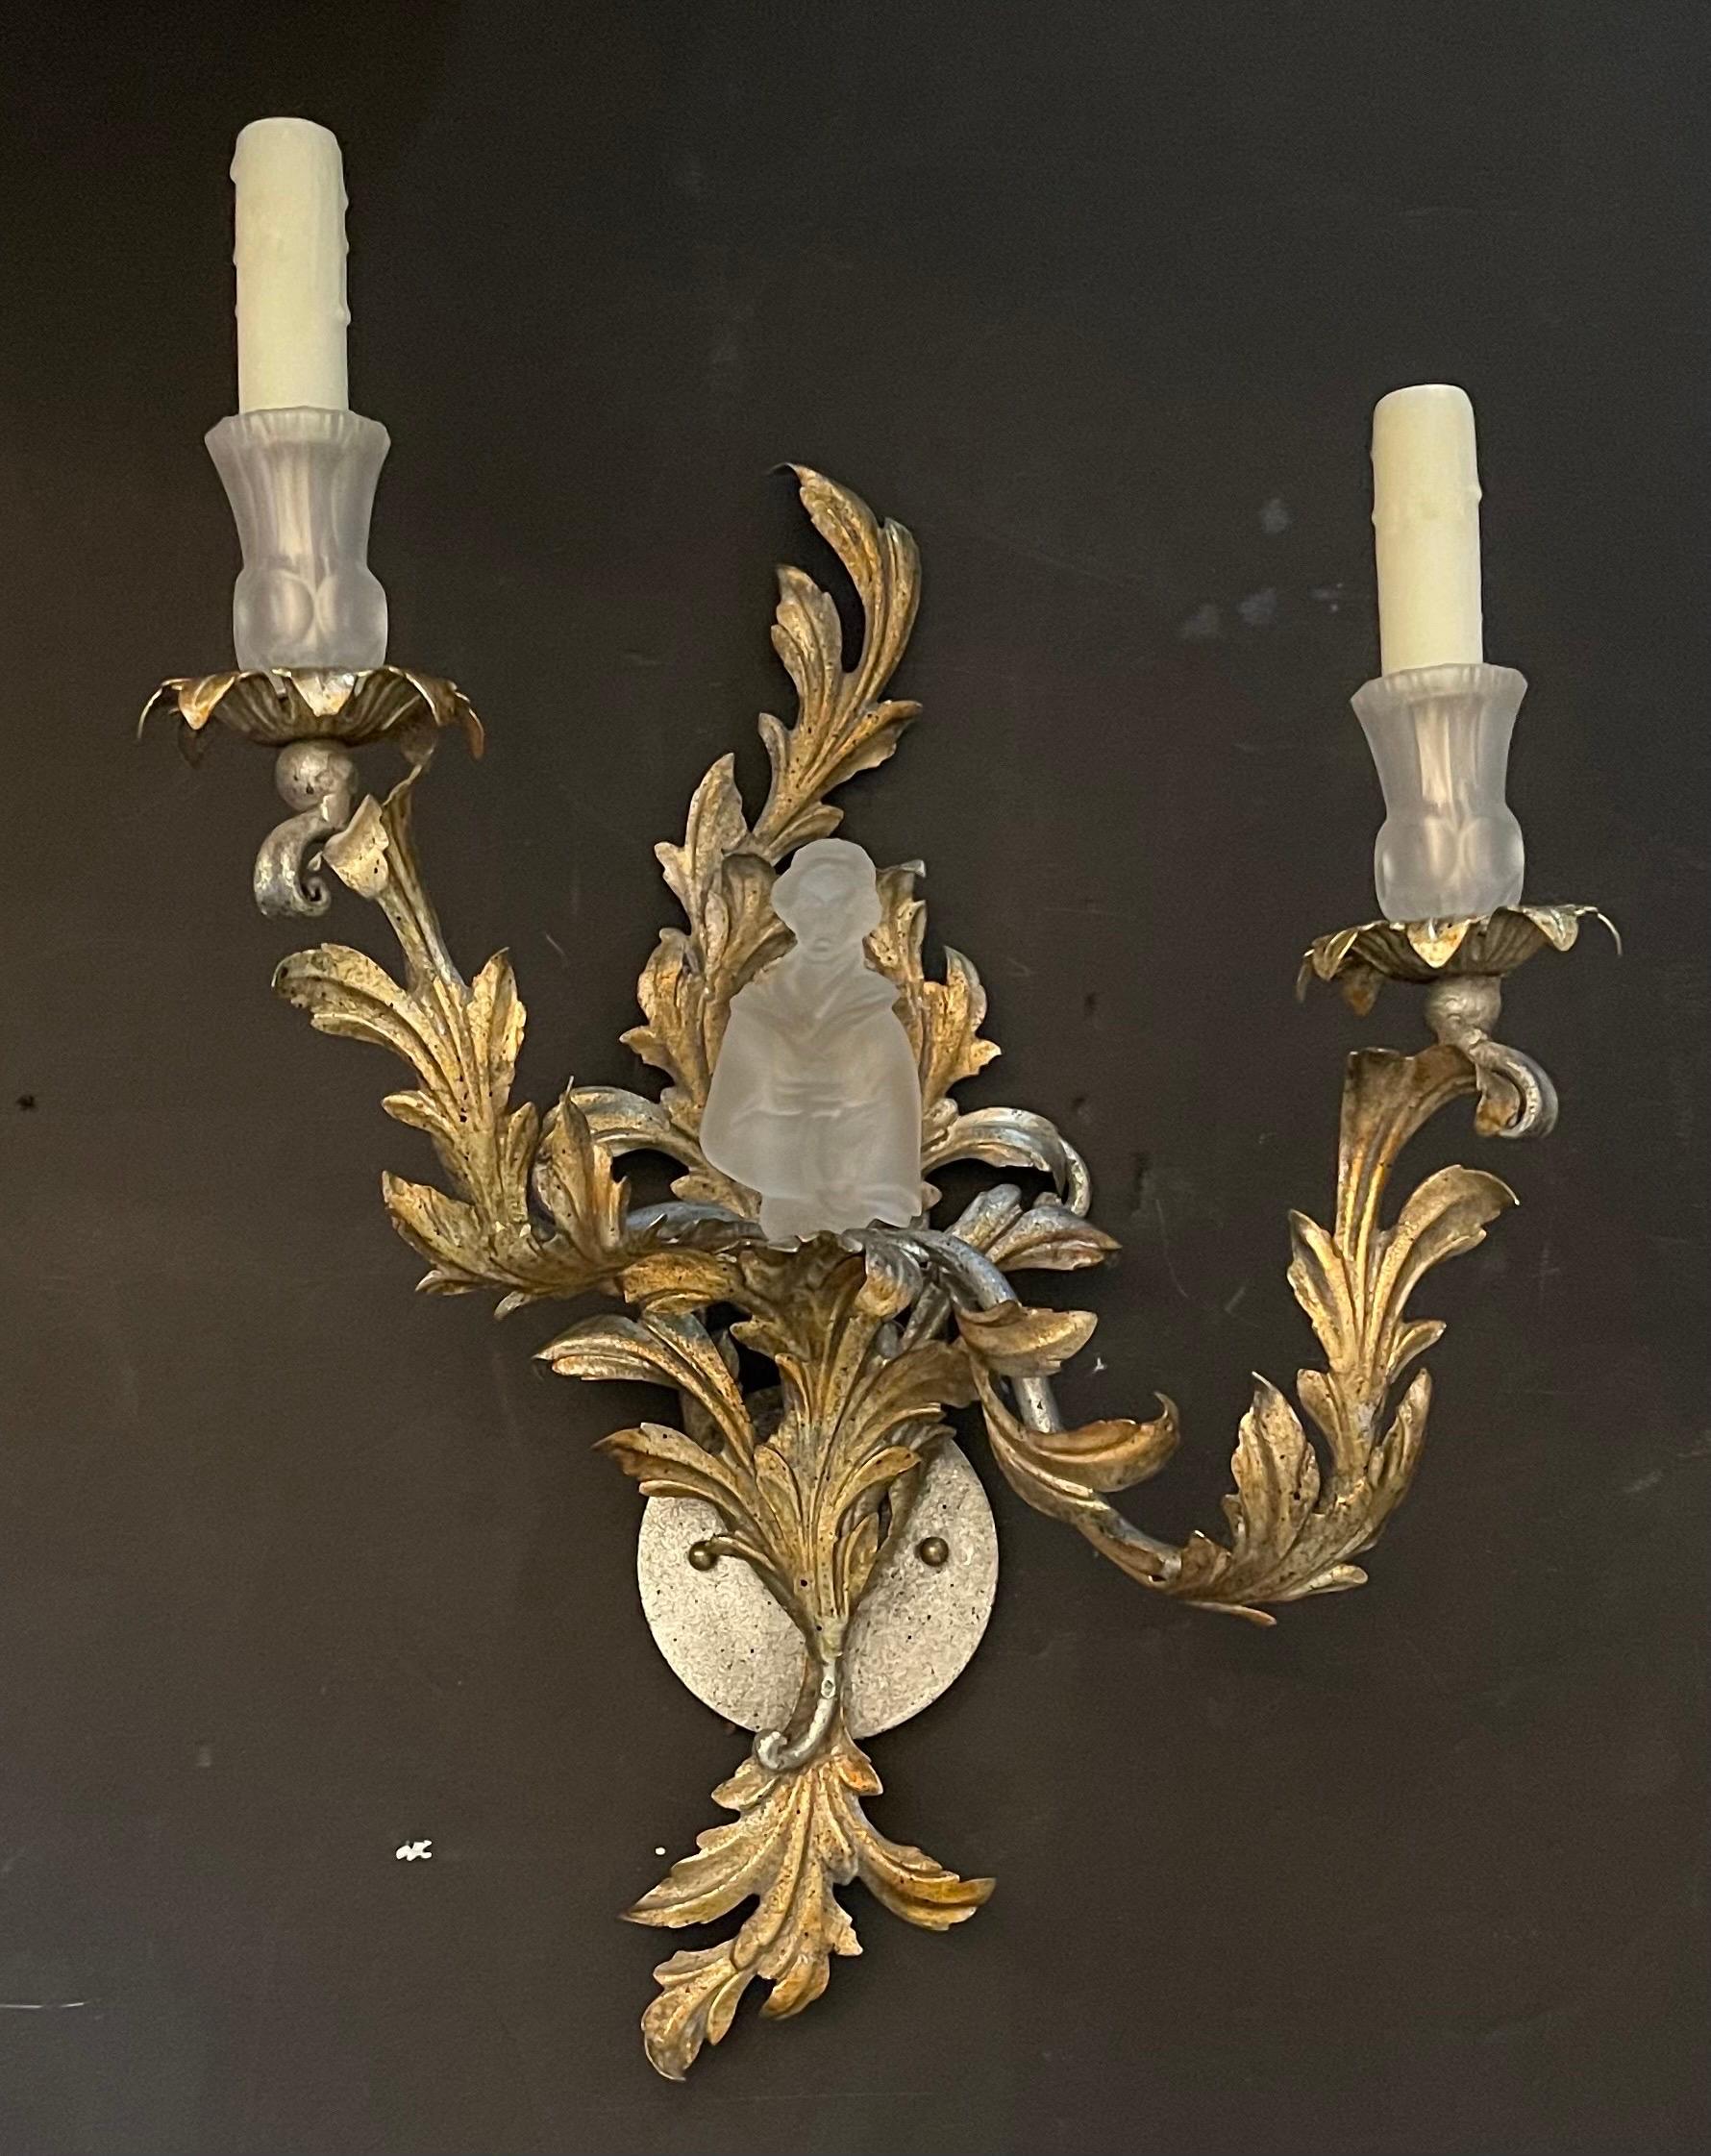 A wonderful pair of Sherle Wagner / Maison Bagues style chinoiserie crystal figurine two tones silver & gold gilt two candelabra light sconces.